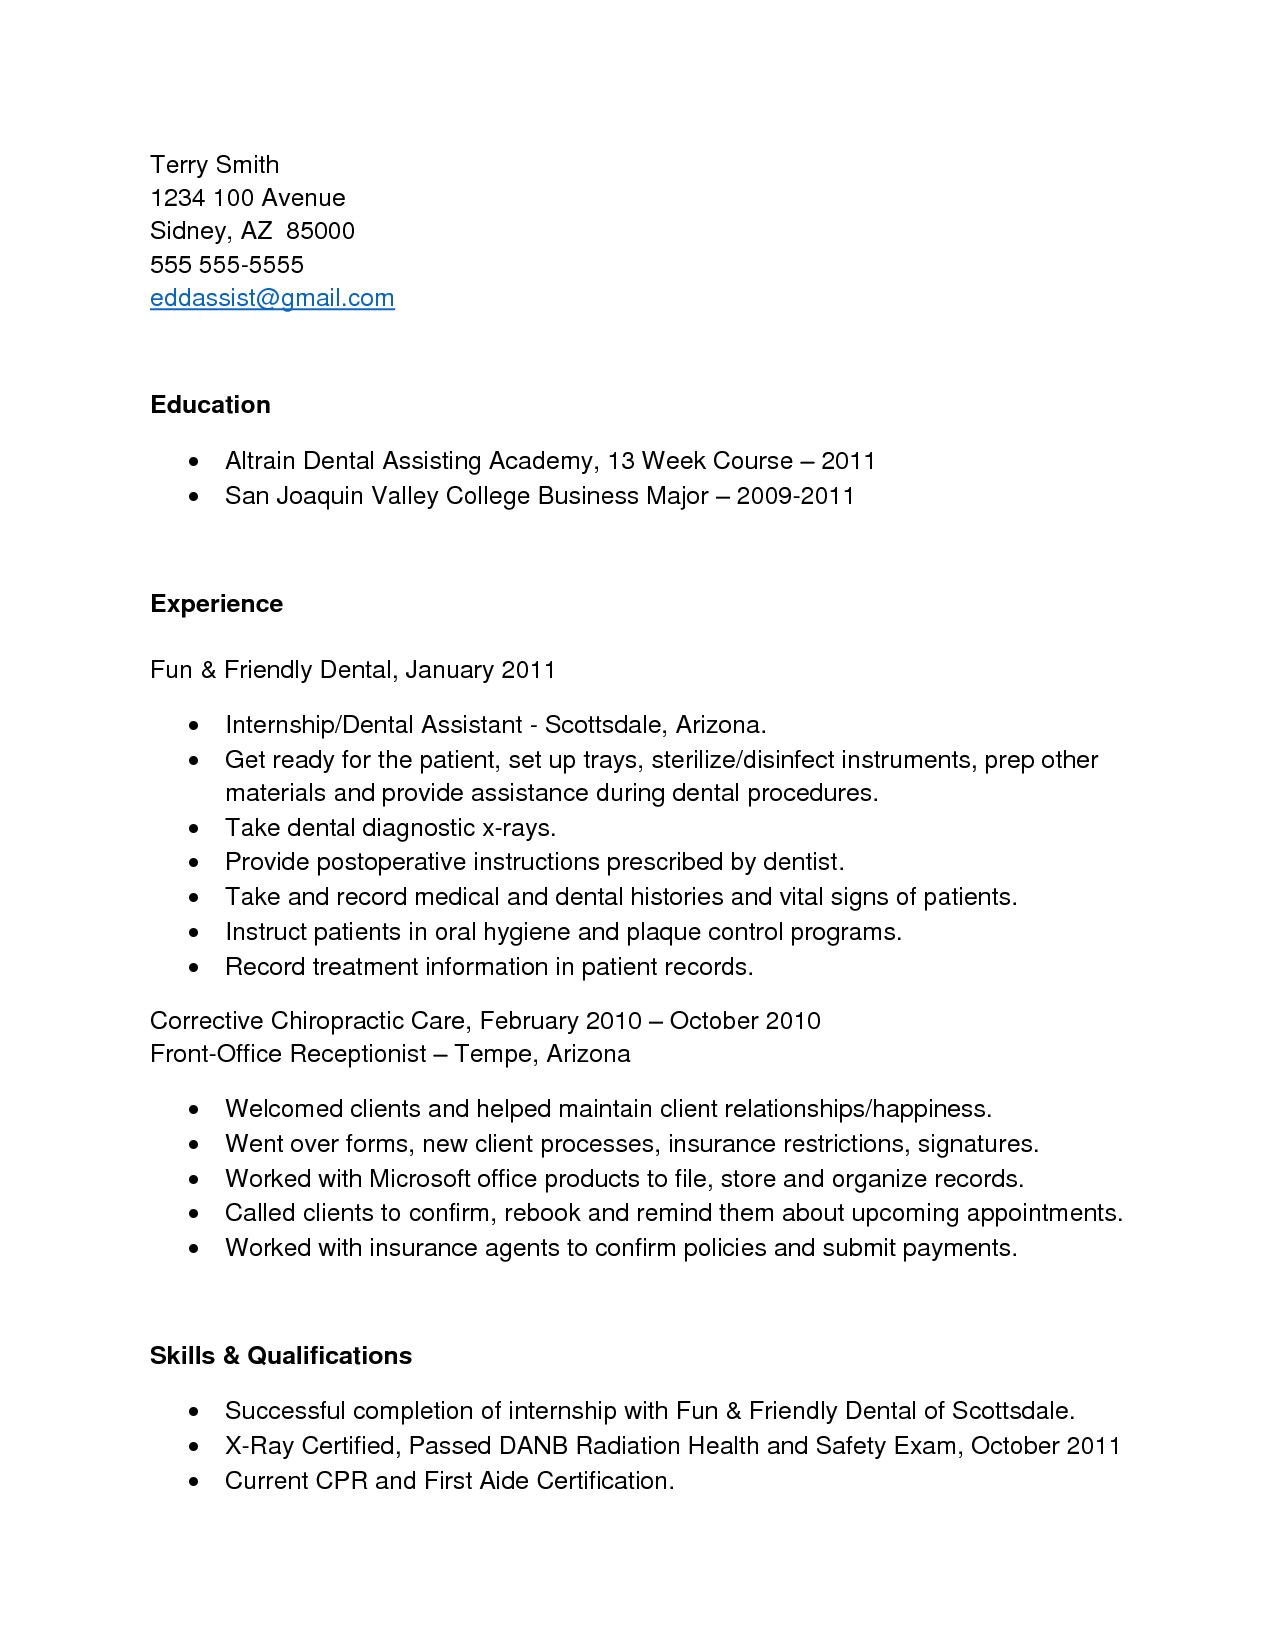 sample resume for office assistant with no experience